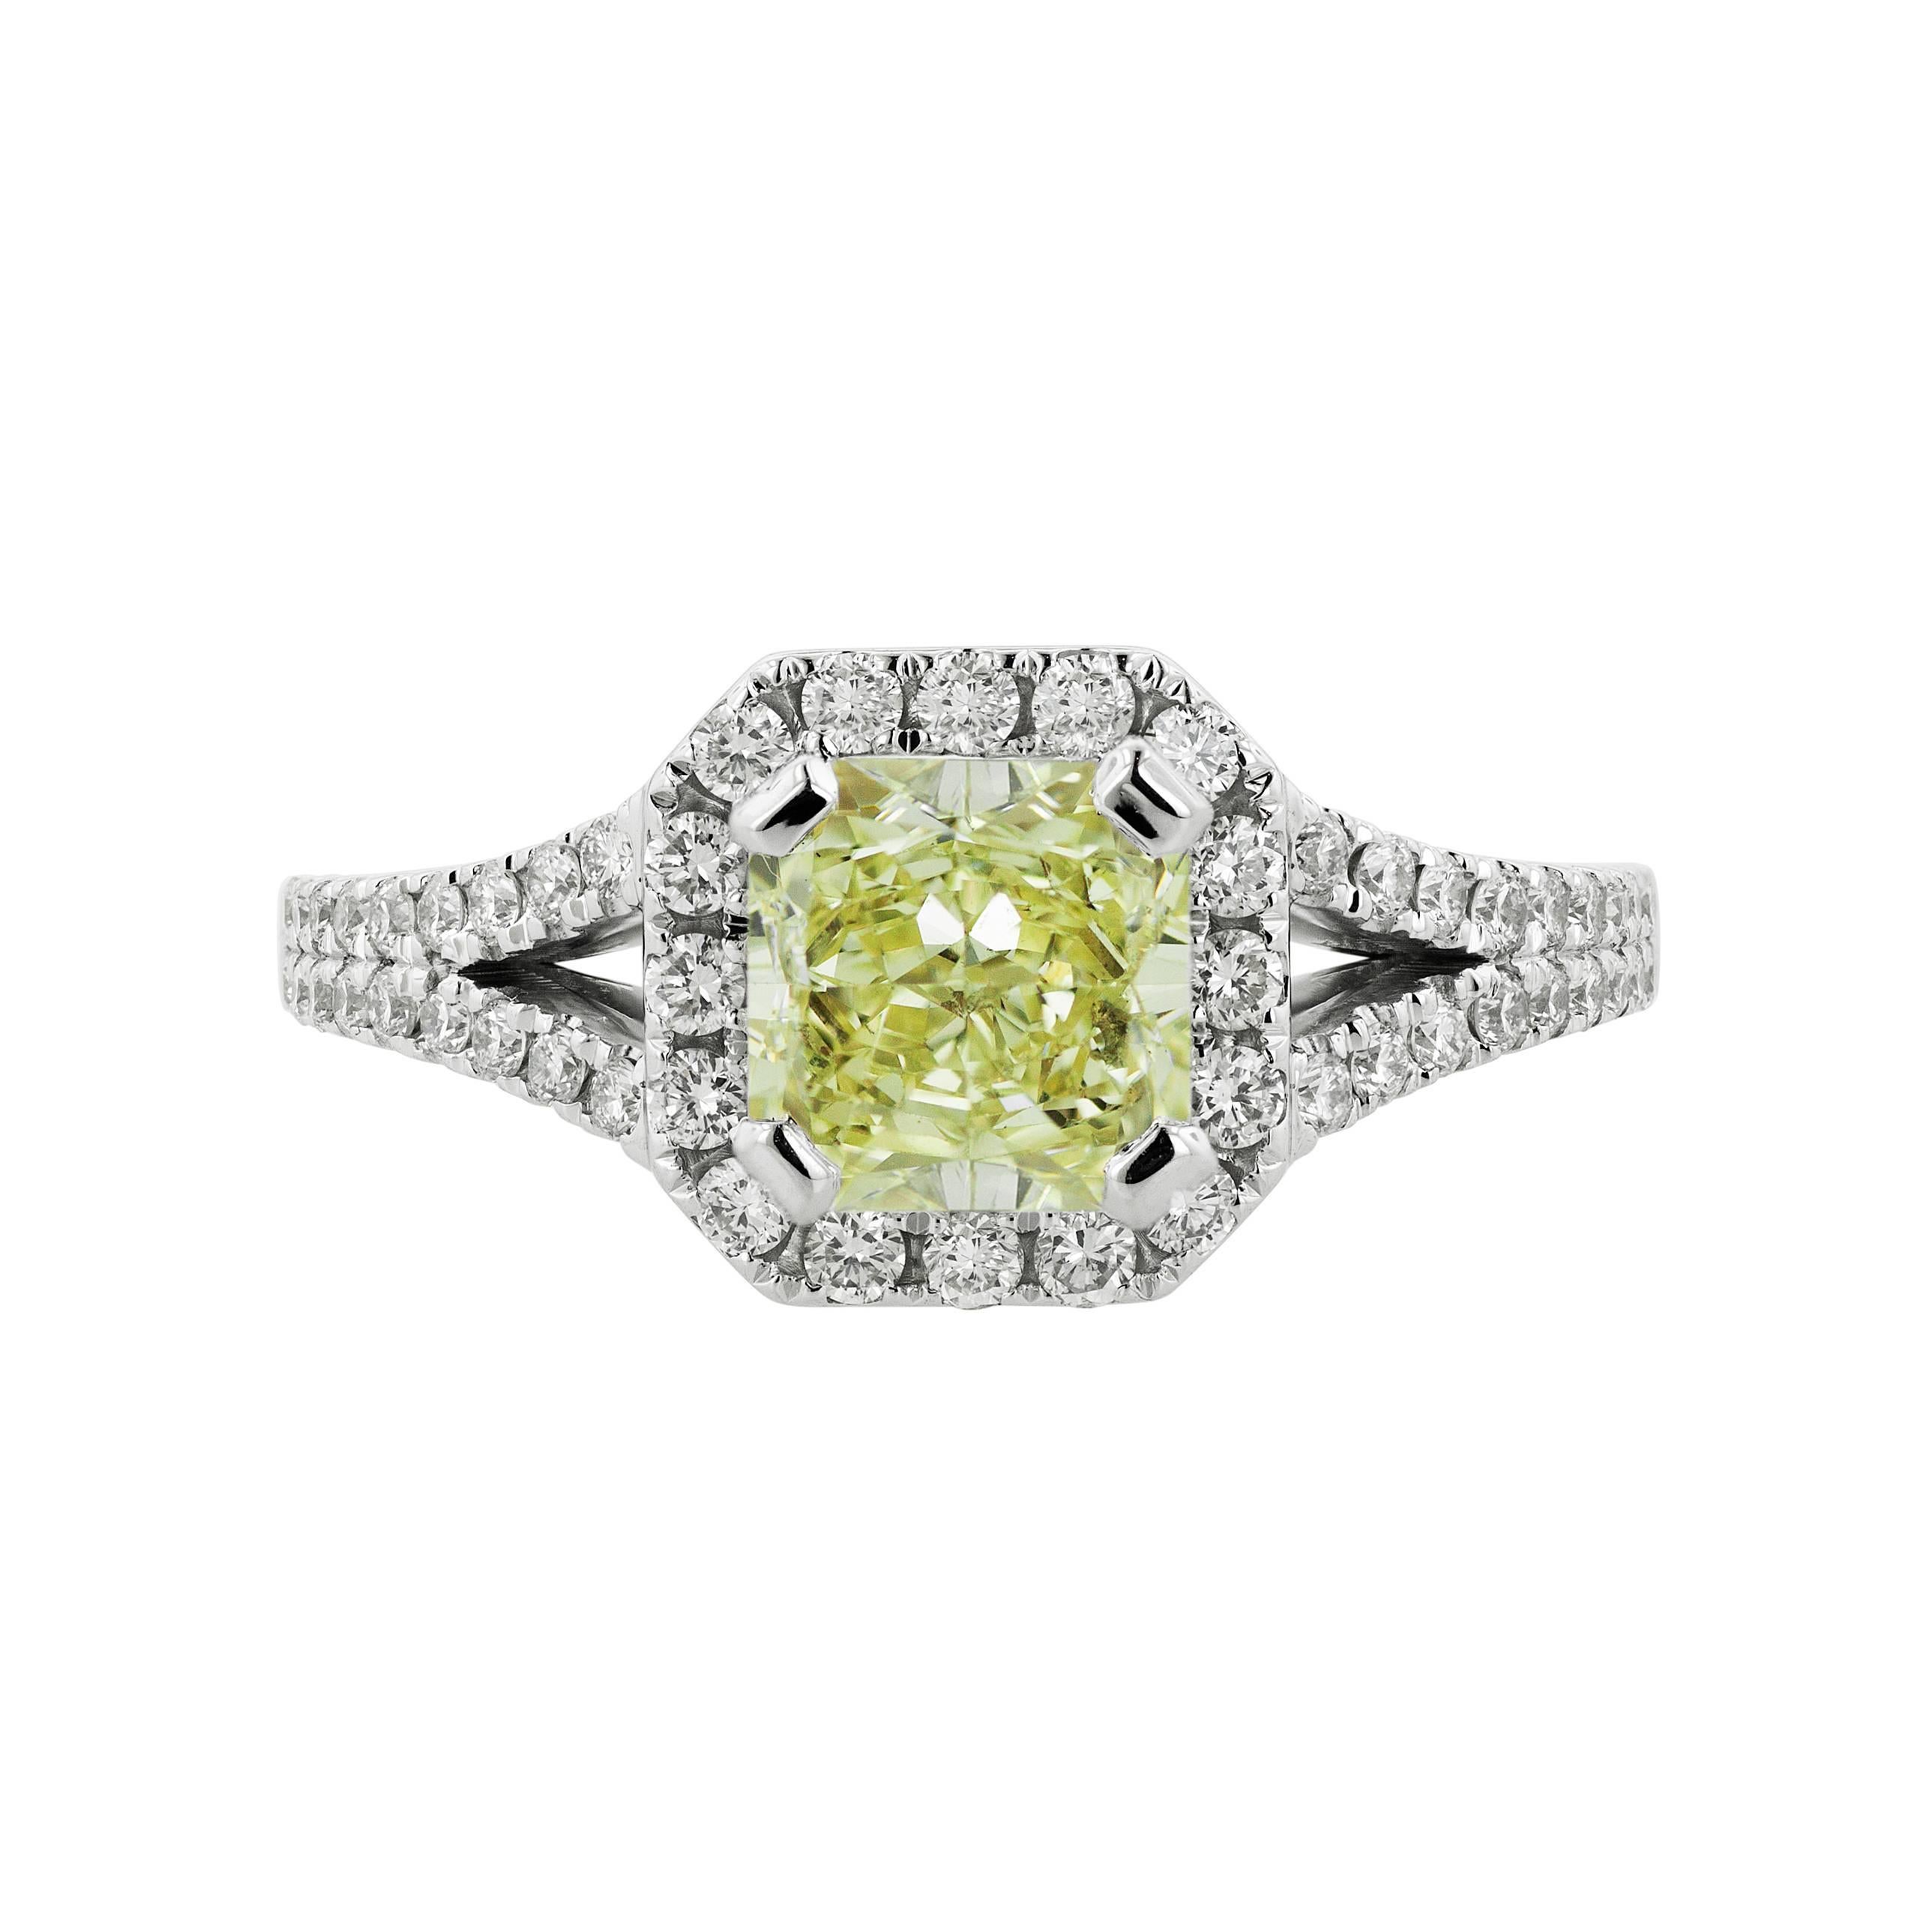 A classic and elegant split shank halo ring by Tears Undressed. A hand-made new jewelry piece set in 18 karat white gold with an exceptional 1.61 carat yellow (W-X) center stone. Encircled by a halo of 52 white round diamonds, creating a surface of